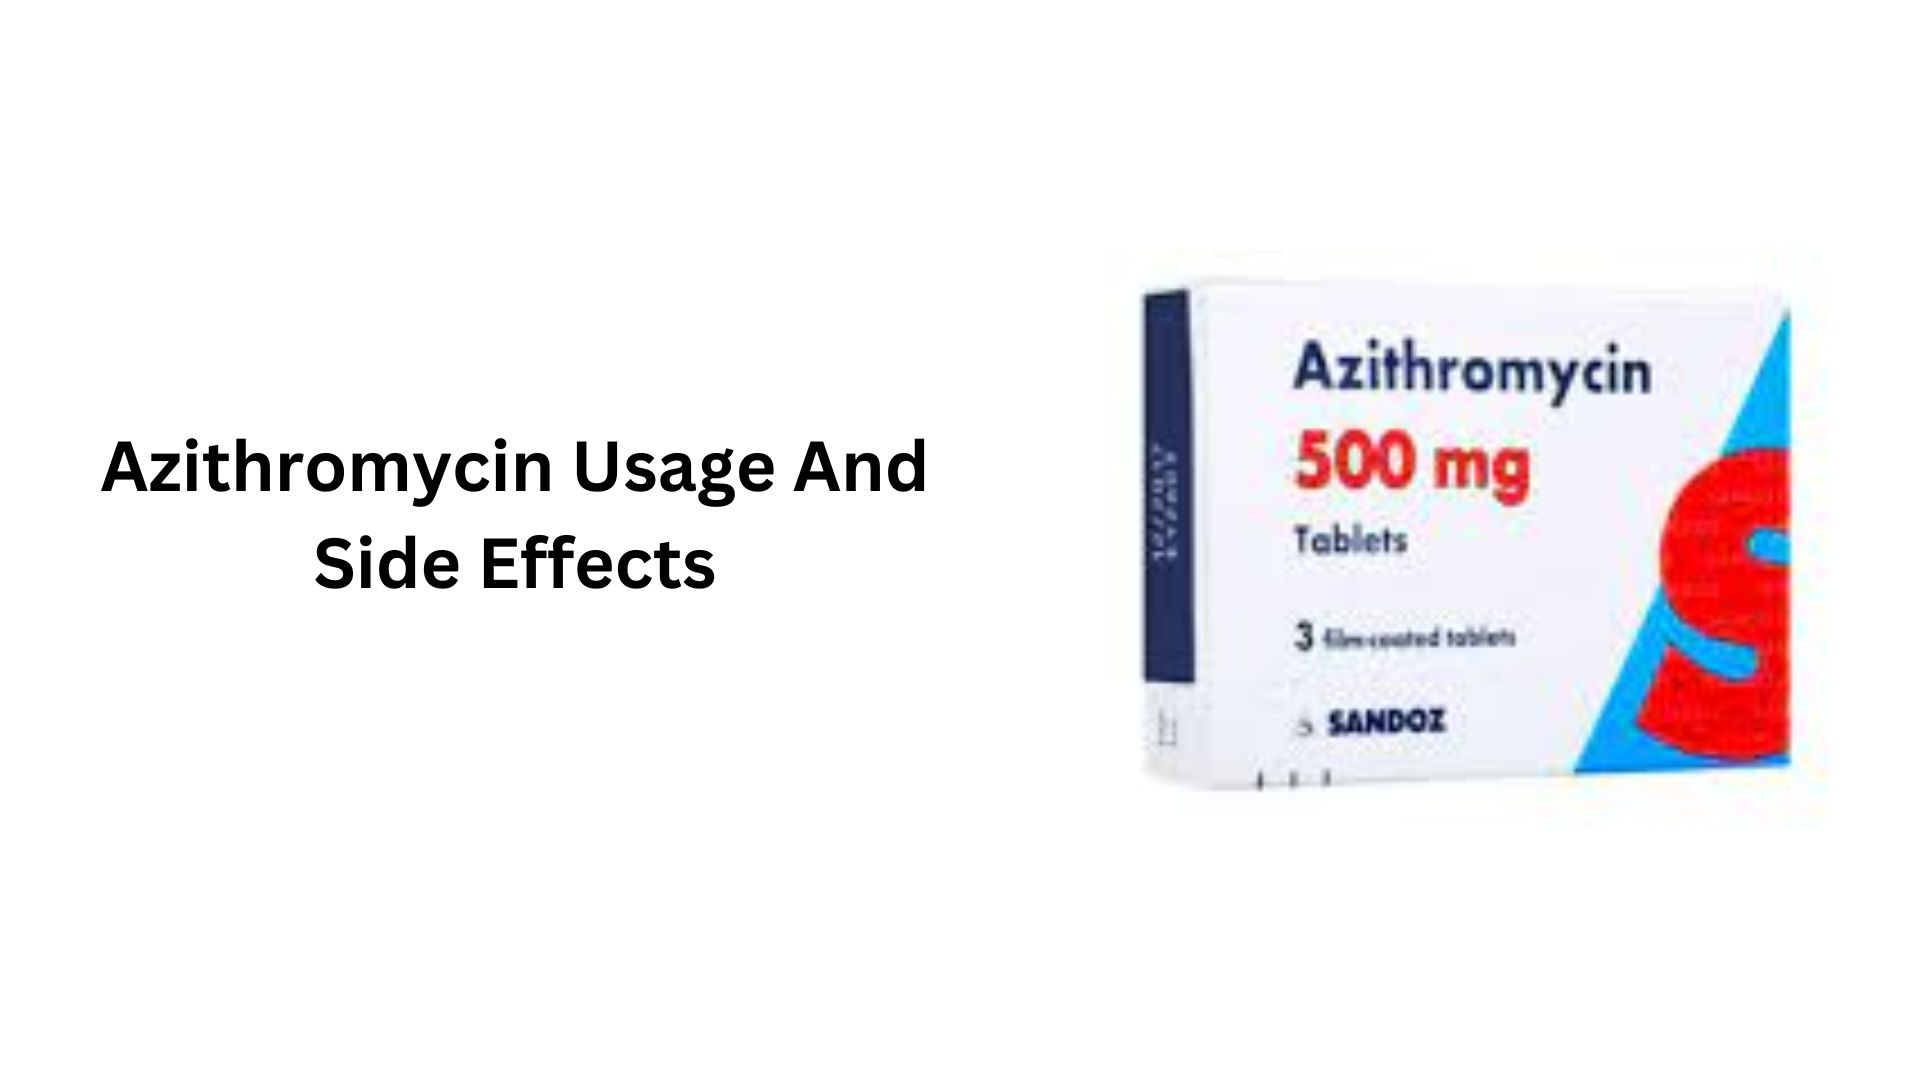 Azithromycin Usage And Side Effects